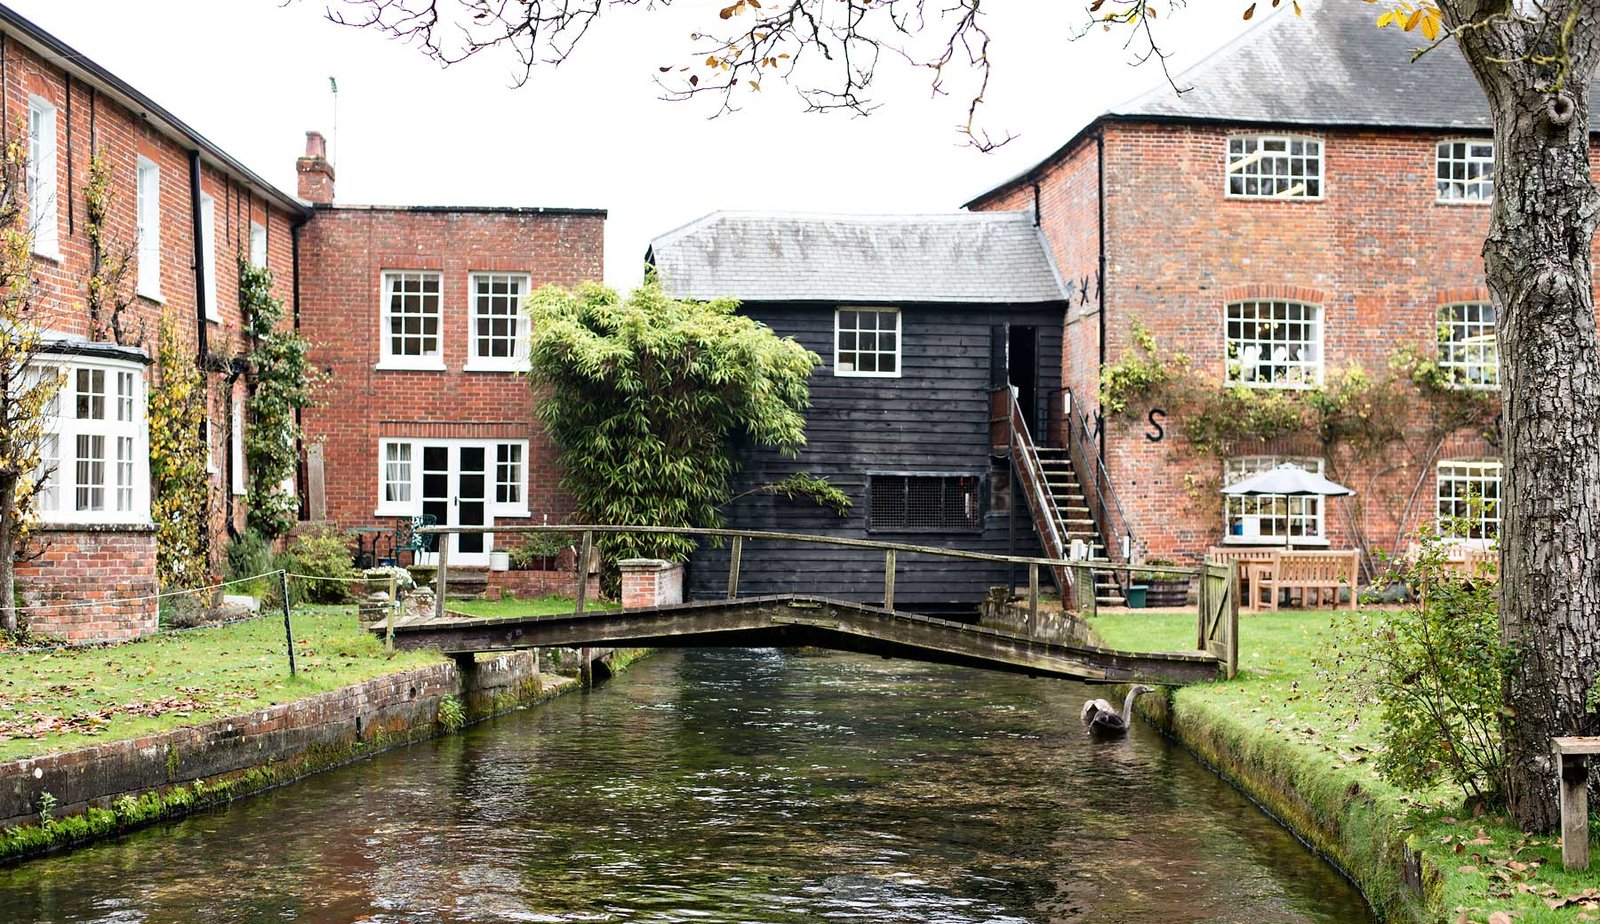 Autumn Day Trip from London to Hampshire - Whitchurch Silk Mill